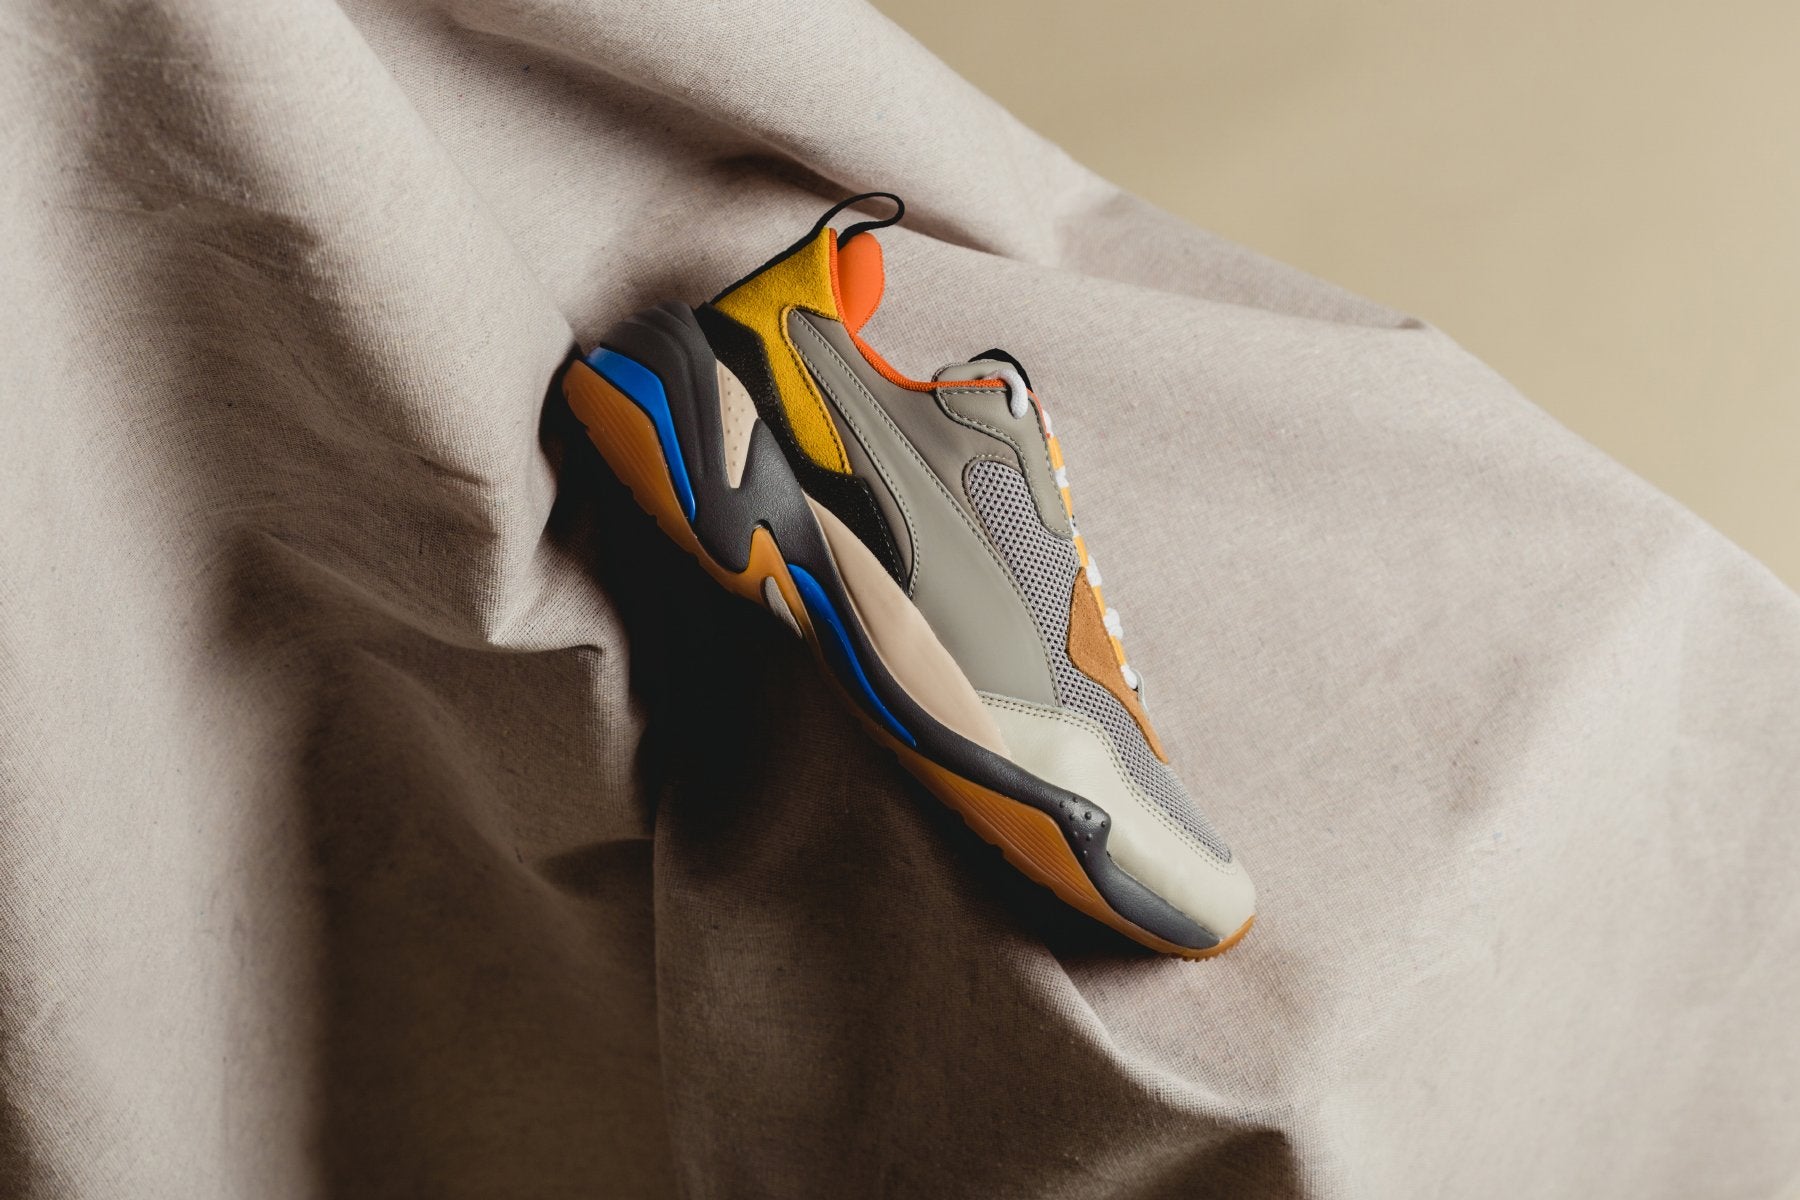 Puma Spectra "Drizzle/Steel Coming Soon – Feature